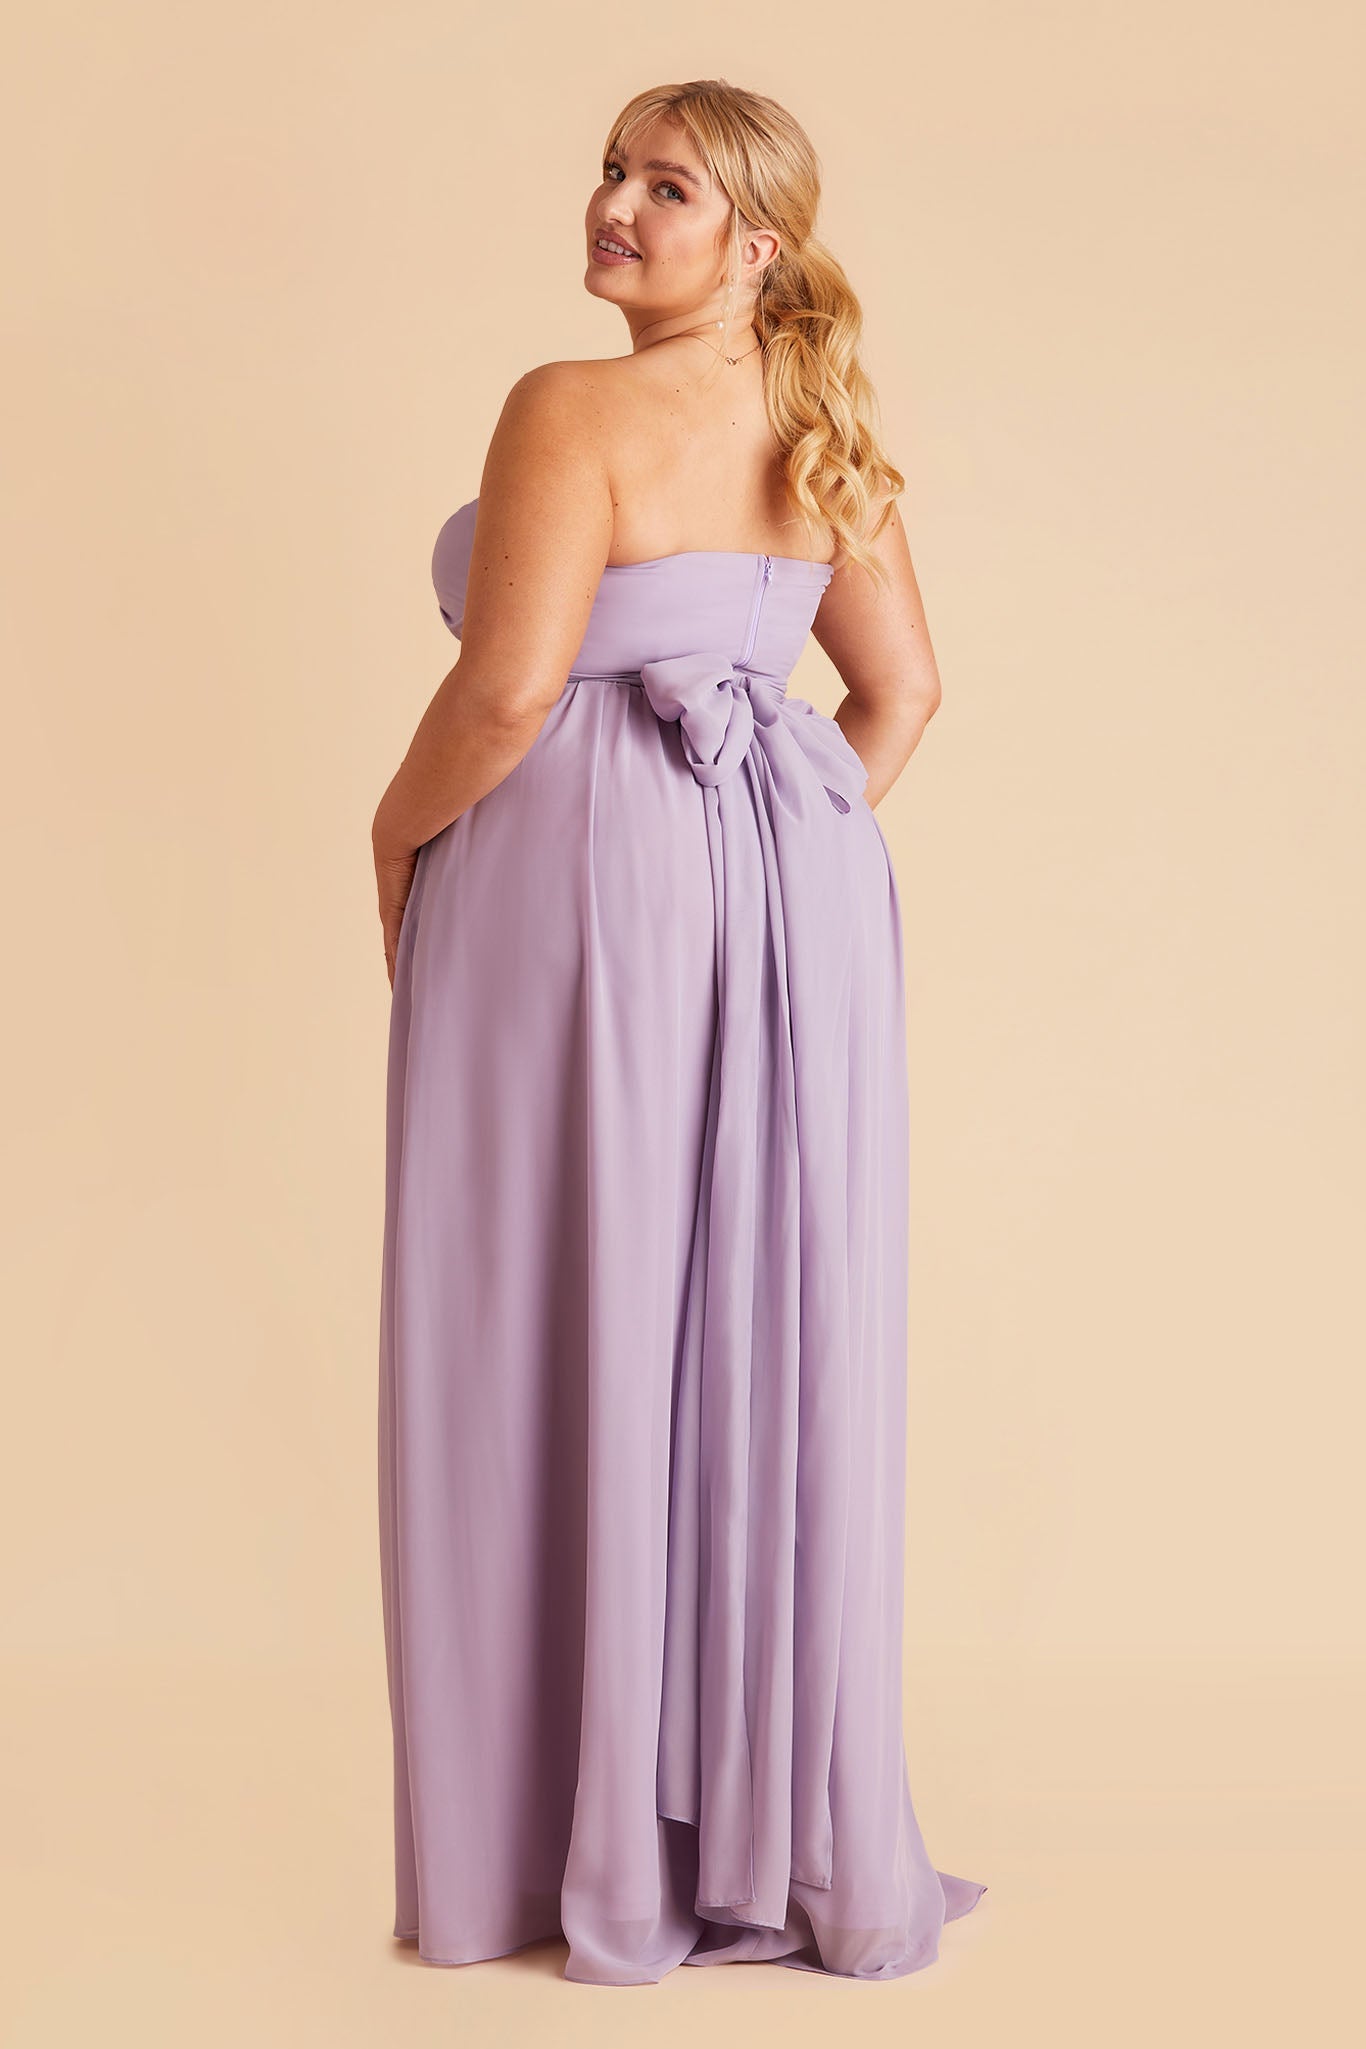 Grace plus size convertible bridesmaid dress in Lavender Chiffon by Birdy Grey, back view